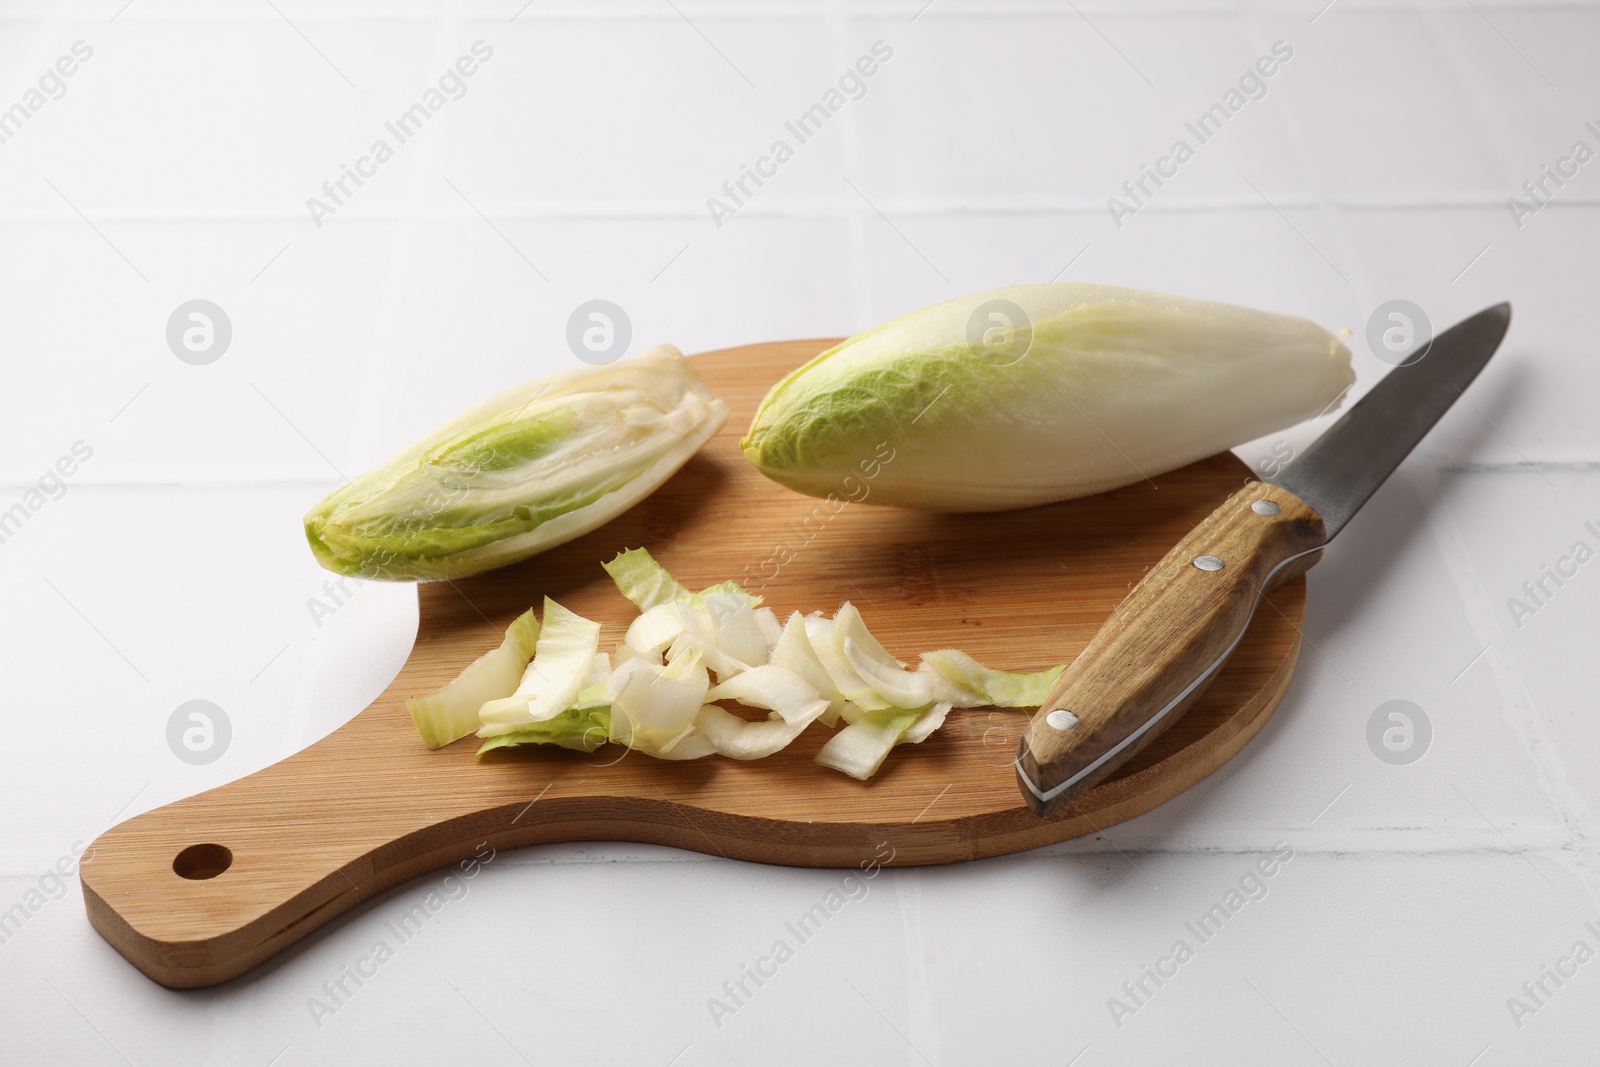 Photo of Fresh raw Belgian endives (chicory), wooden board and knife on white tiled table